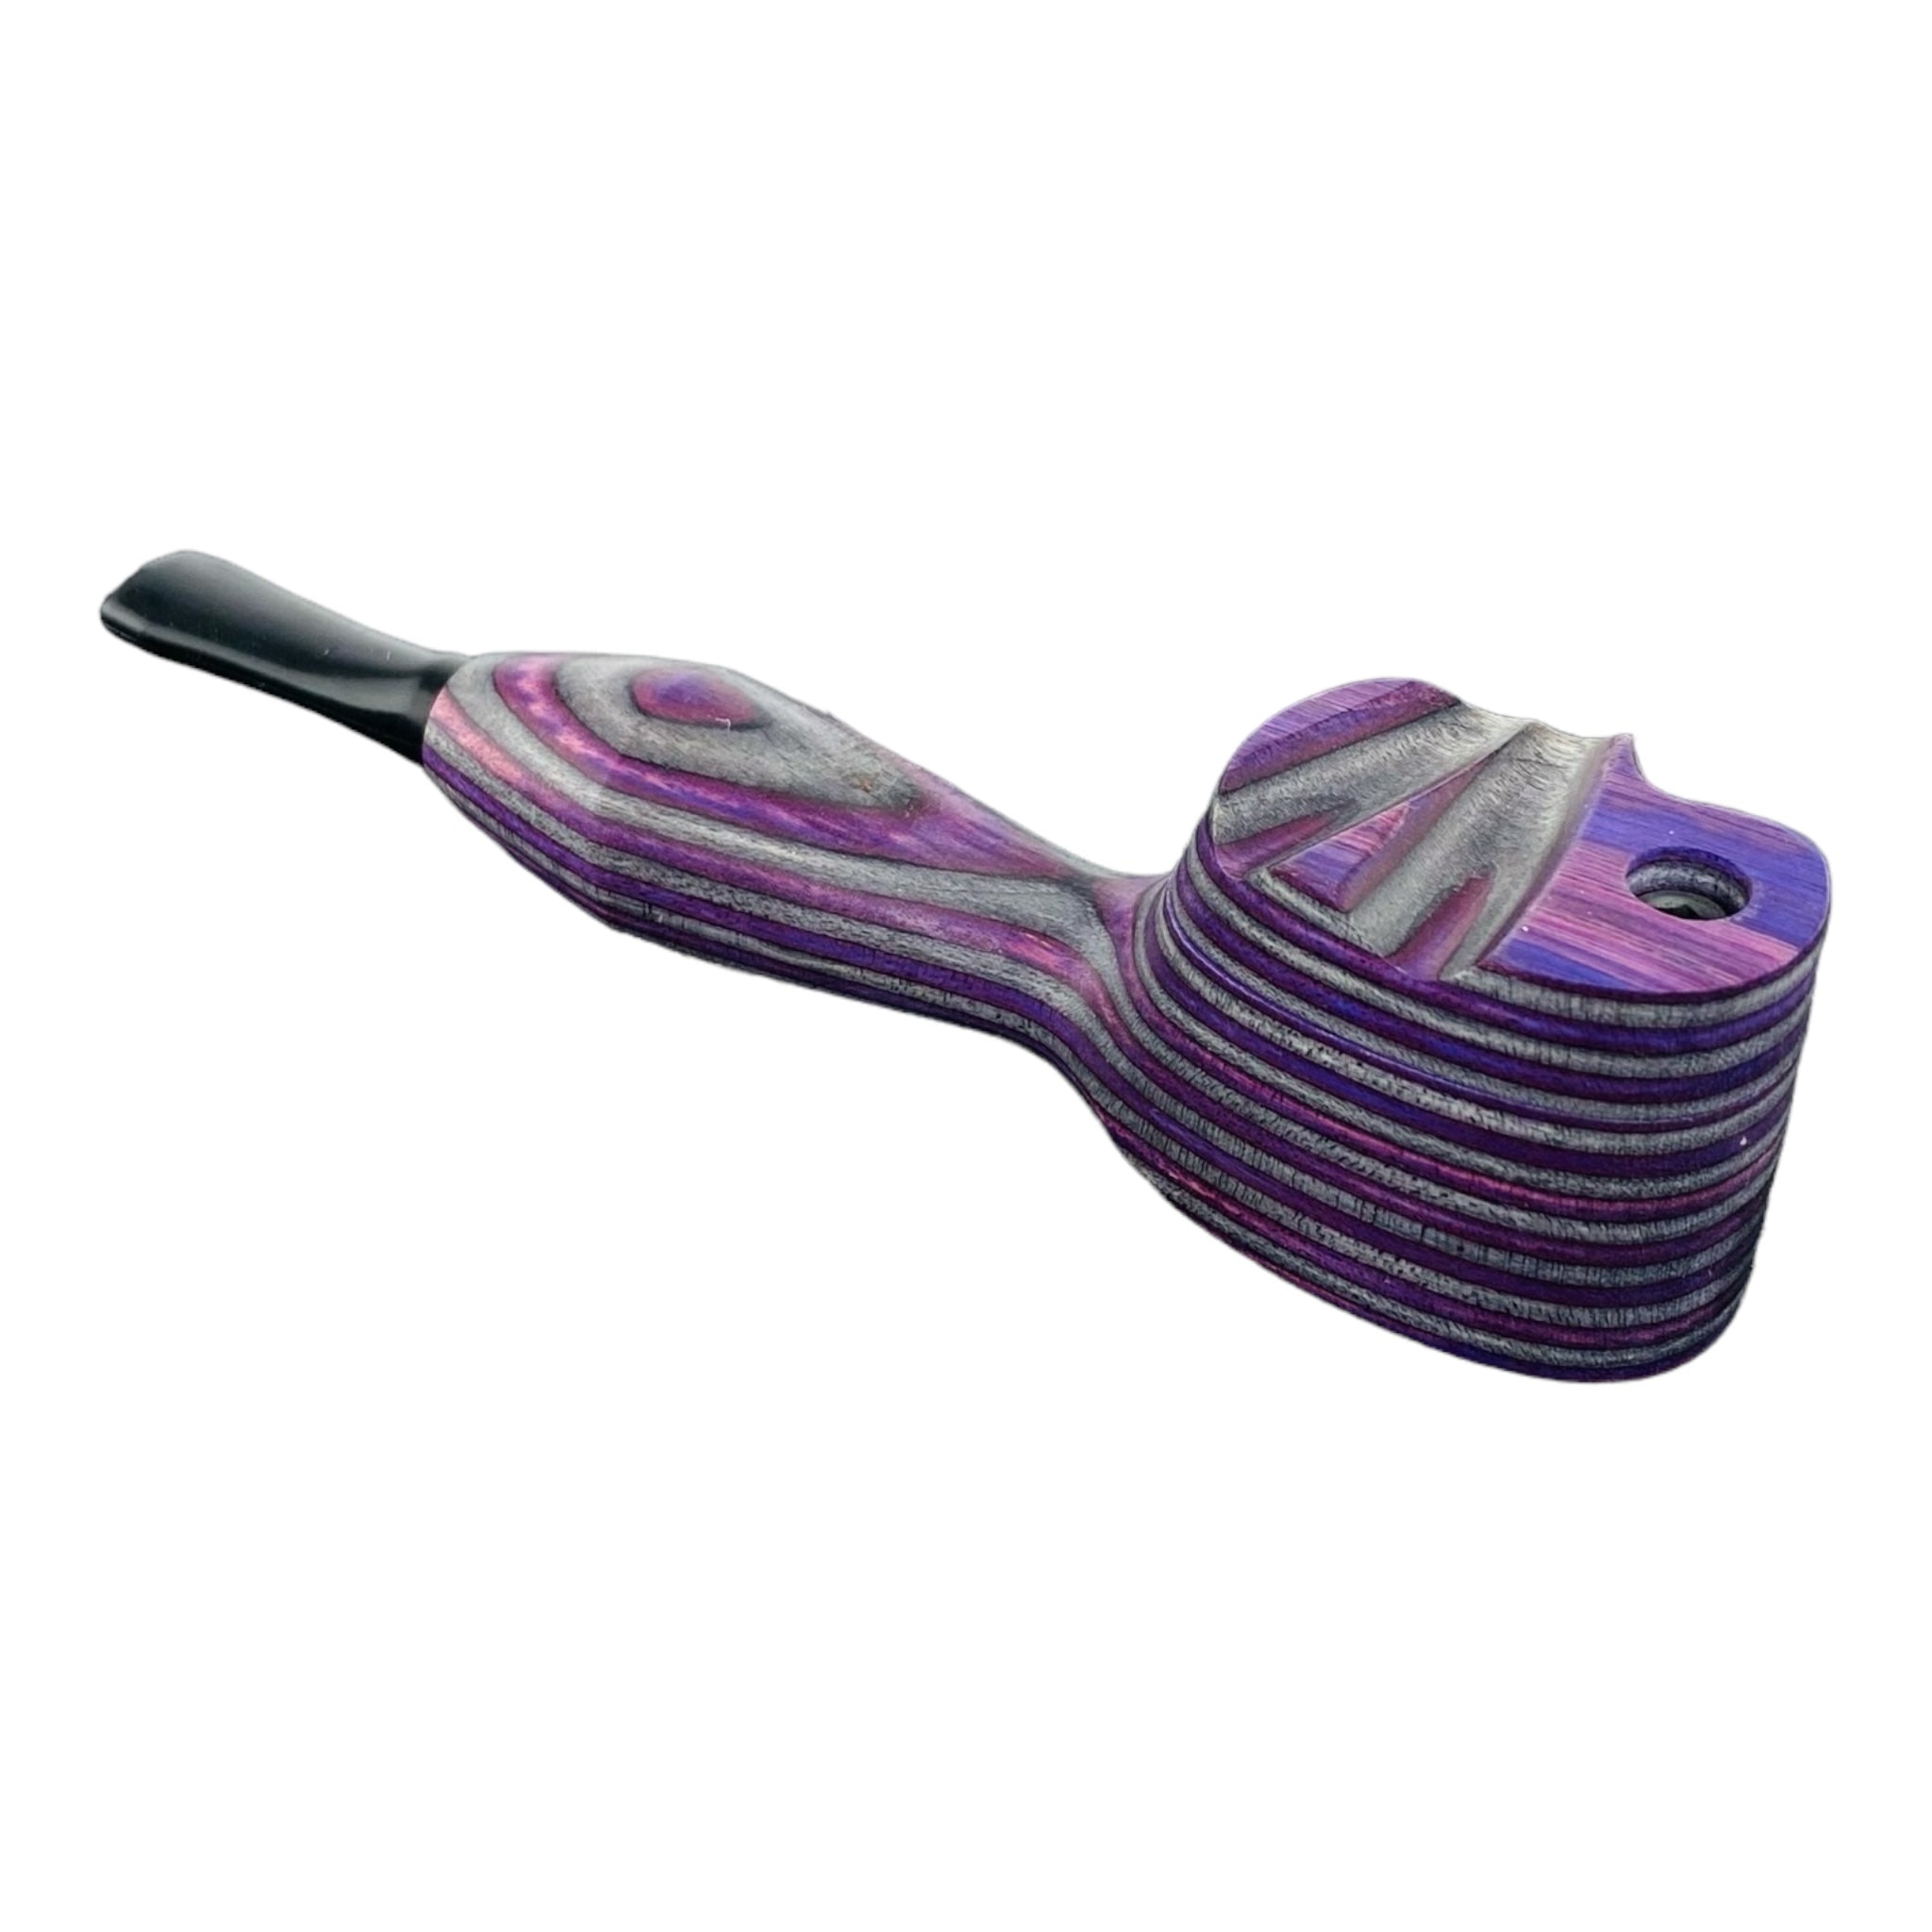 Wood Hand Pipe - Multi Colored Wood Pipe With Plastic Mouthpiece with swivel lid